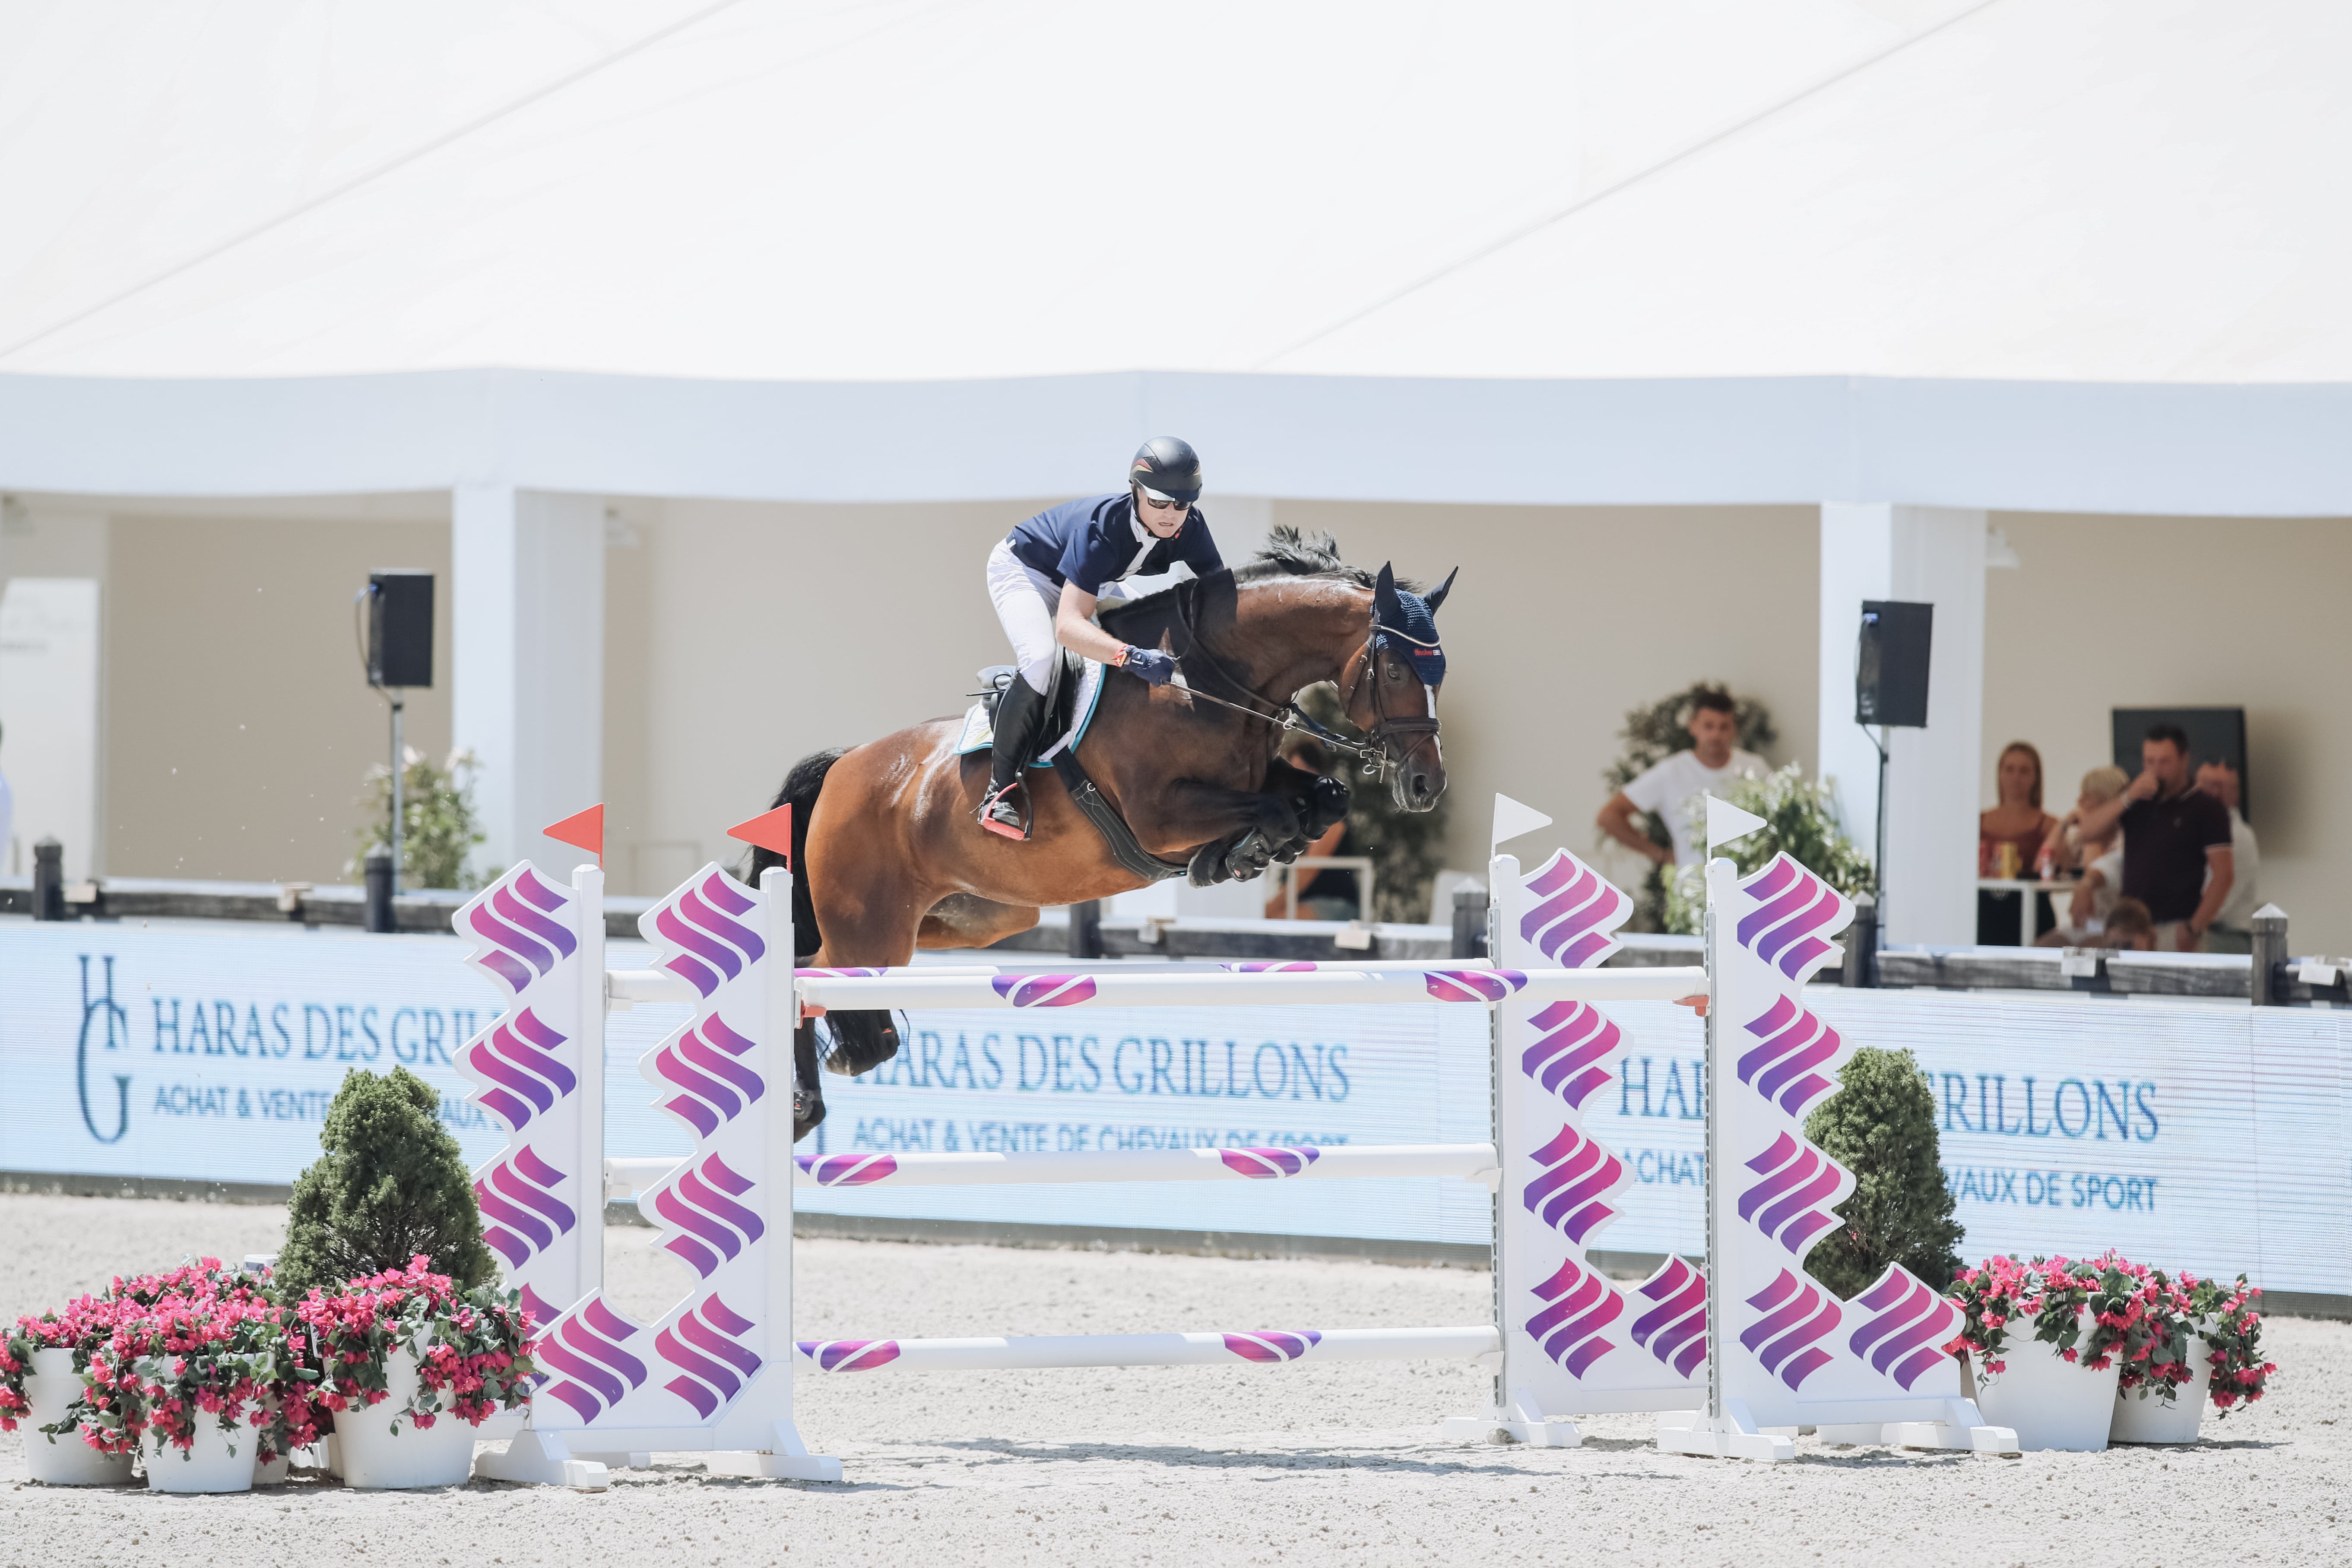 Michael Jung jumps towards victory in CSI4* Longines Ranking in St Tropez